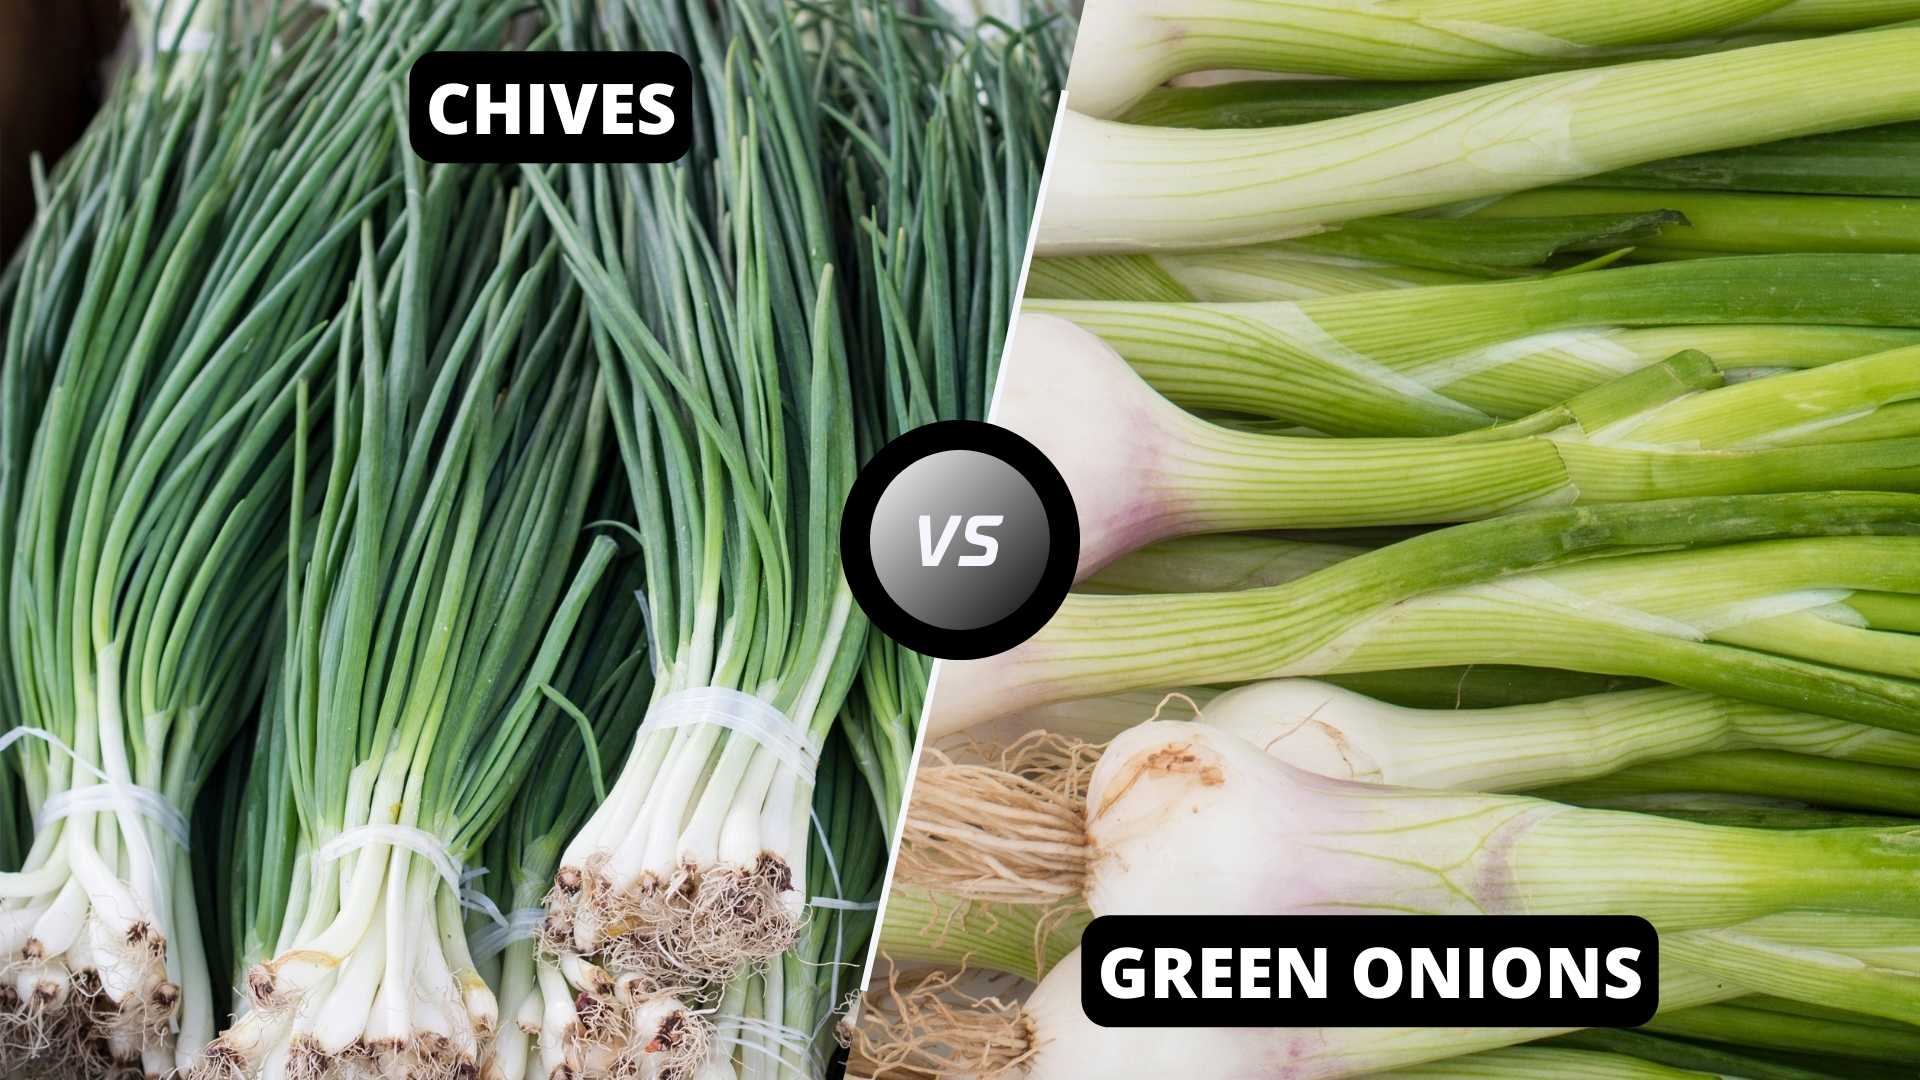 Chives vs Green Onions